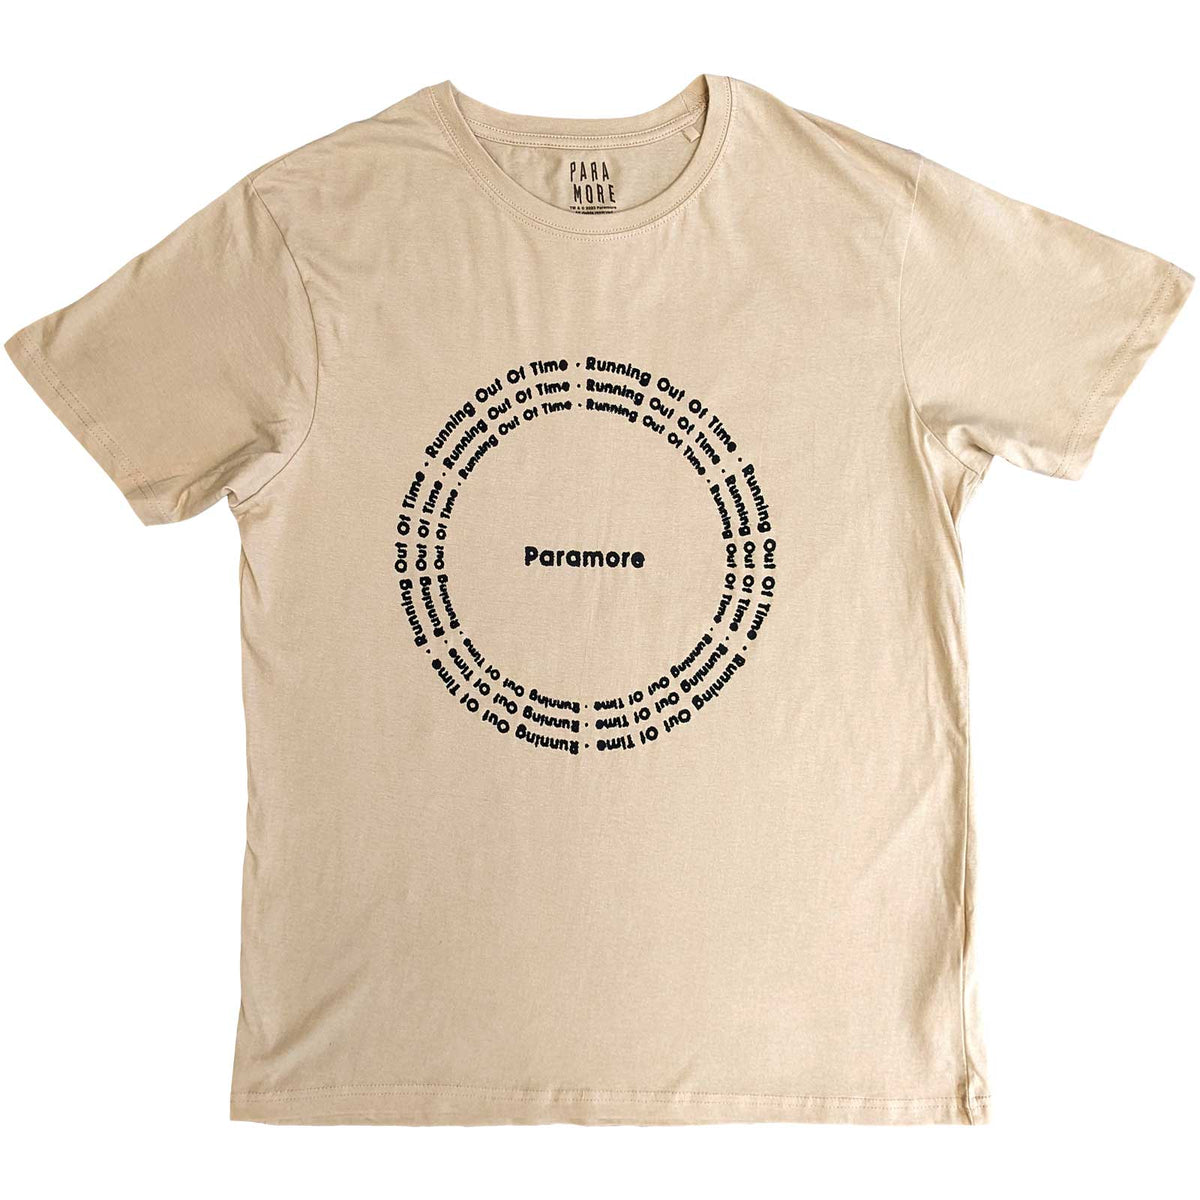 Paramore Adult T-Shirt - Root Circle - Sand Official Licensed Design